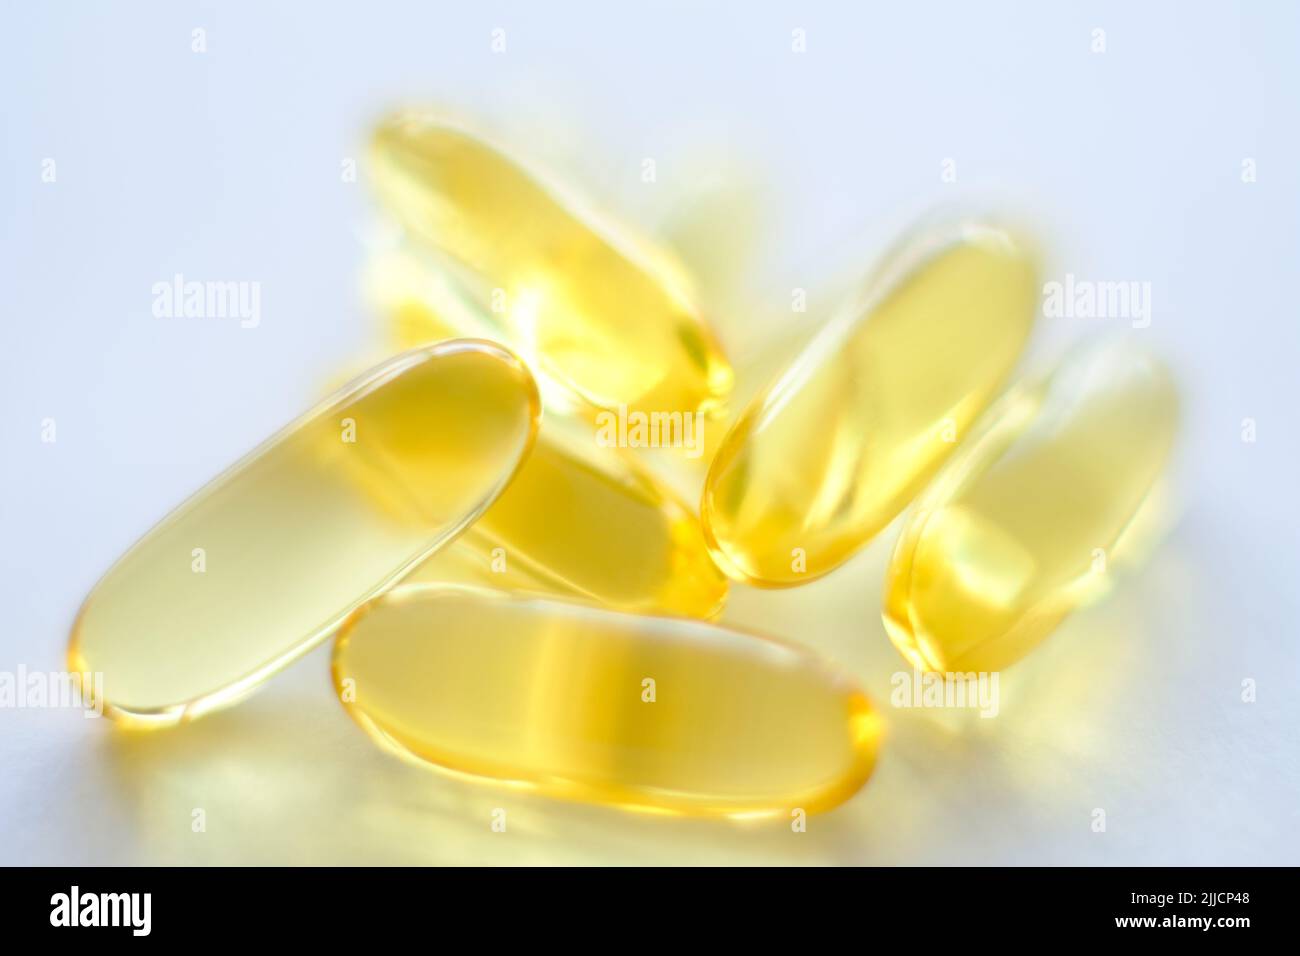 vitamin supplement capsules nutrition healthy diet Stock Photo